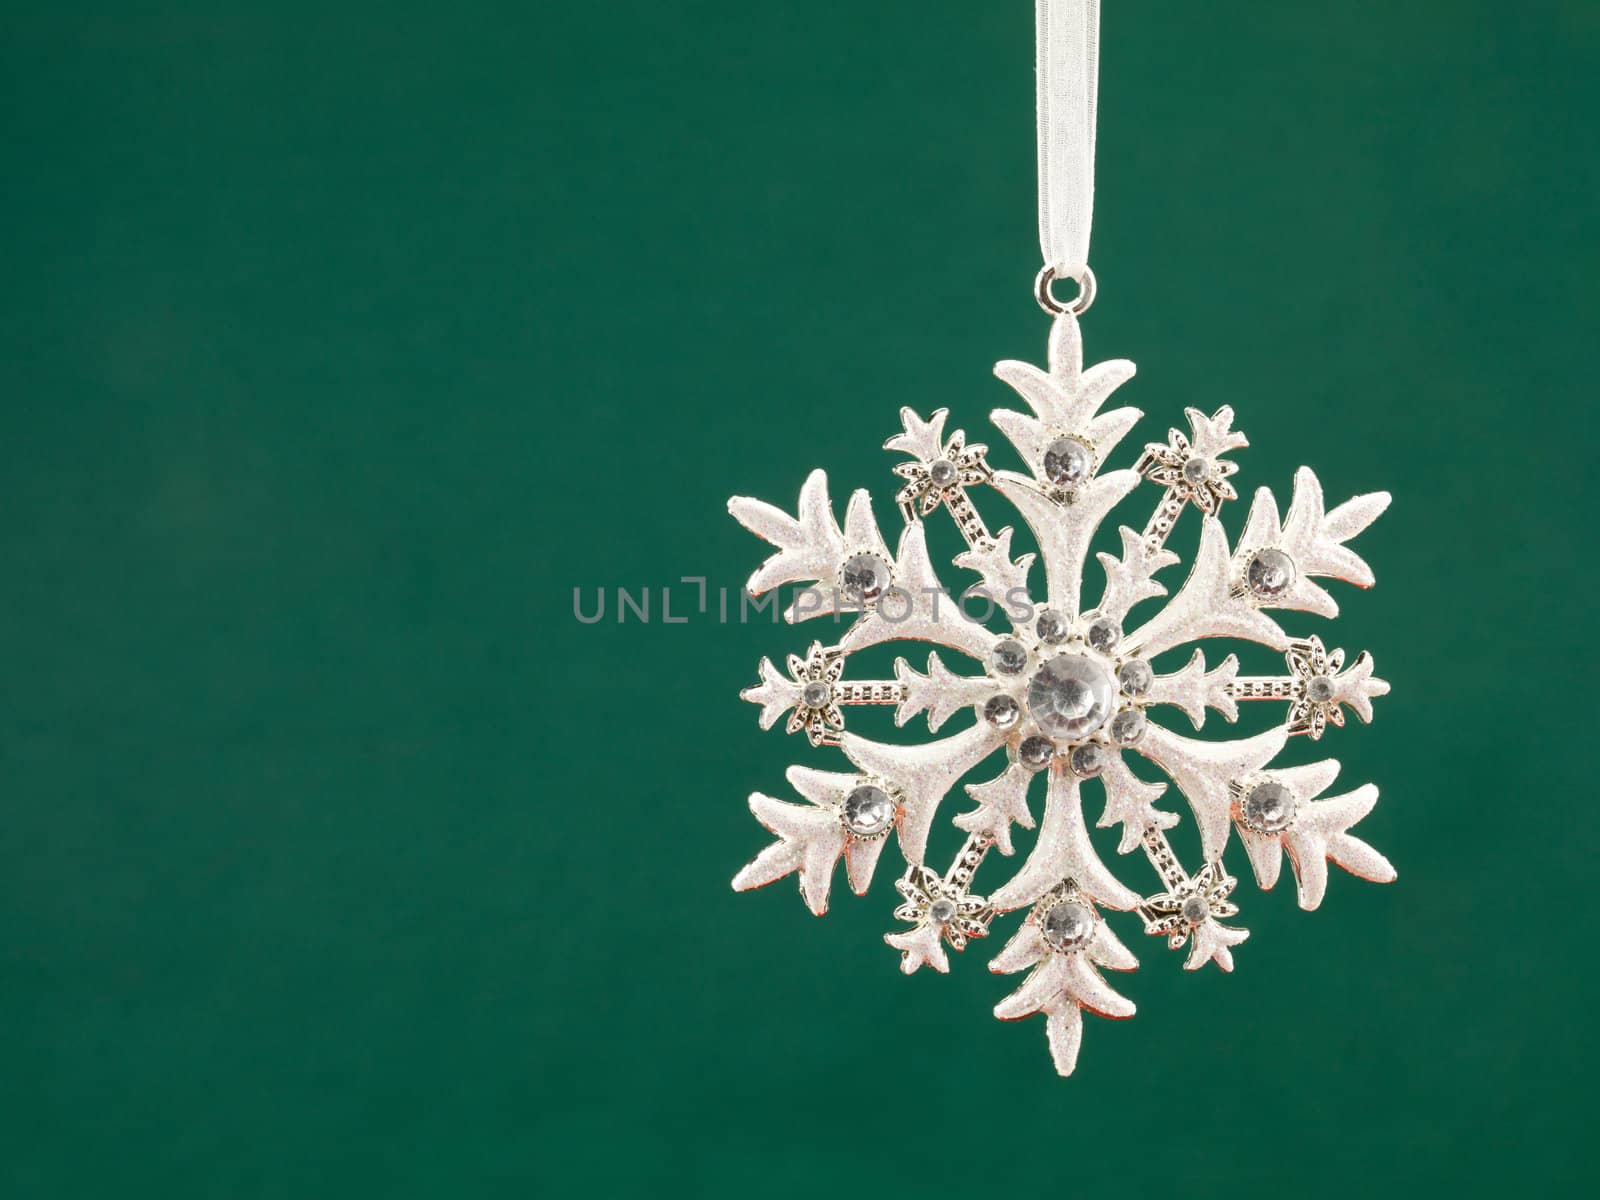 snowflakes pattern bauble hanging over green background by kozzi